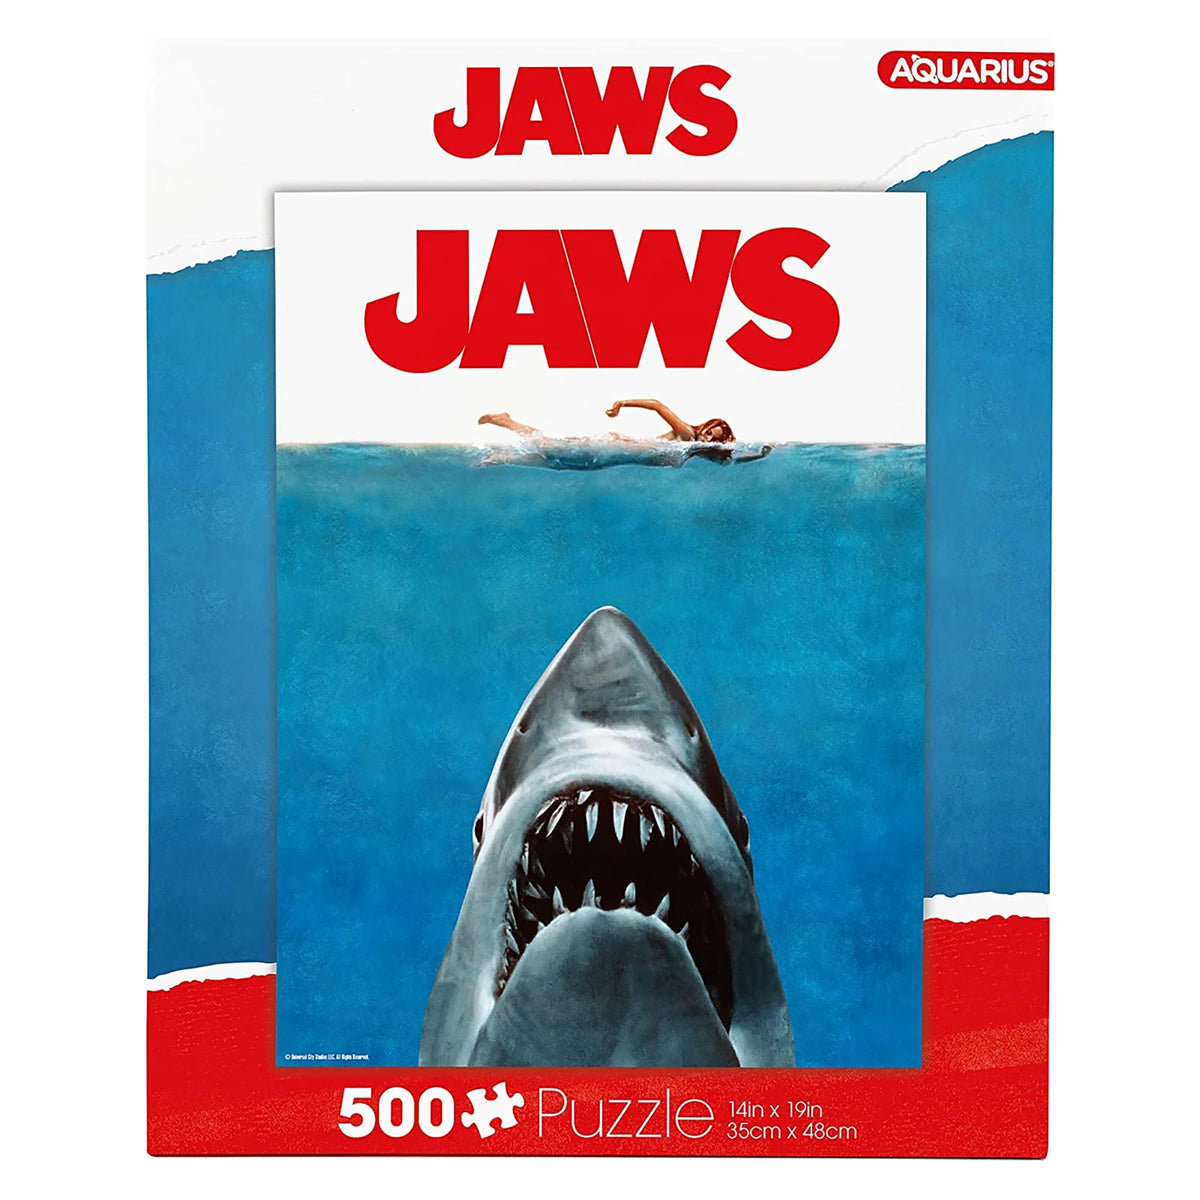 JAWS One Sheet 500 Piece Jigsaw Puzzle Free Shipping MeTV Mall